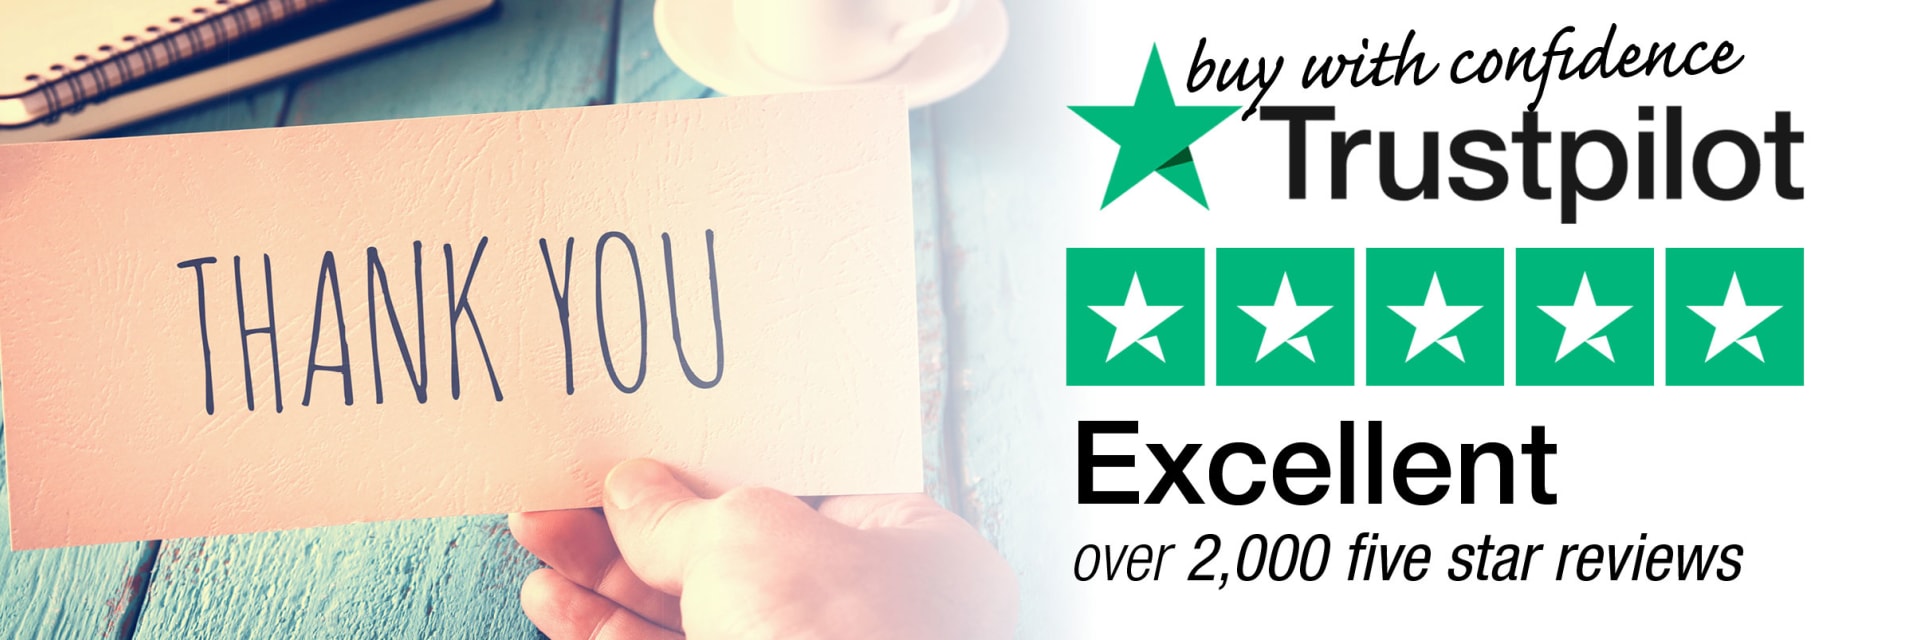 Trustpilot buy with confidence